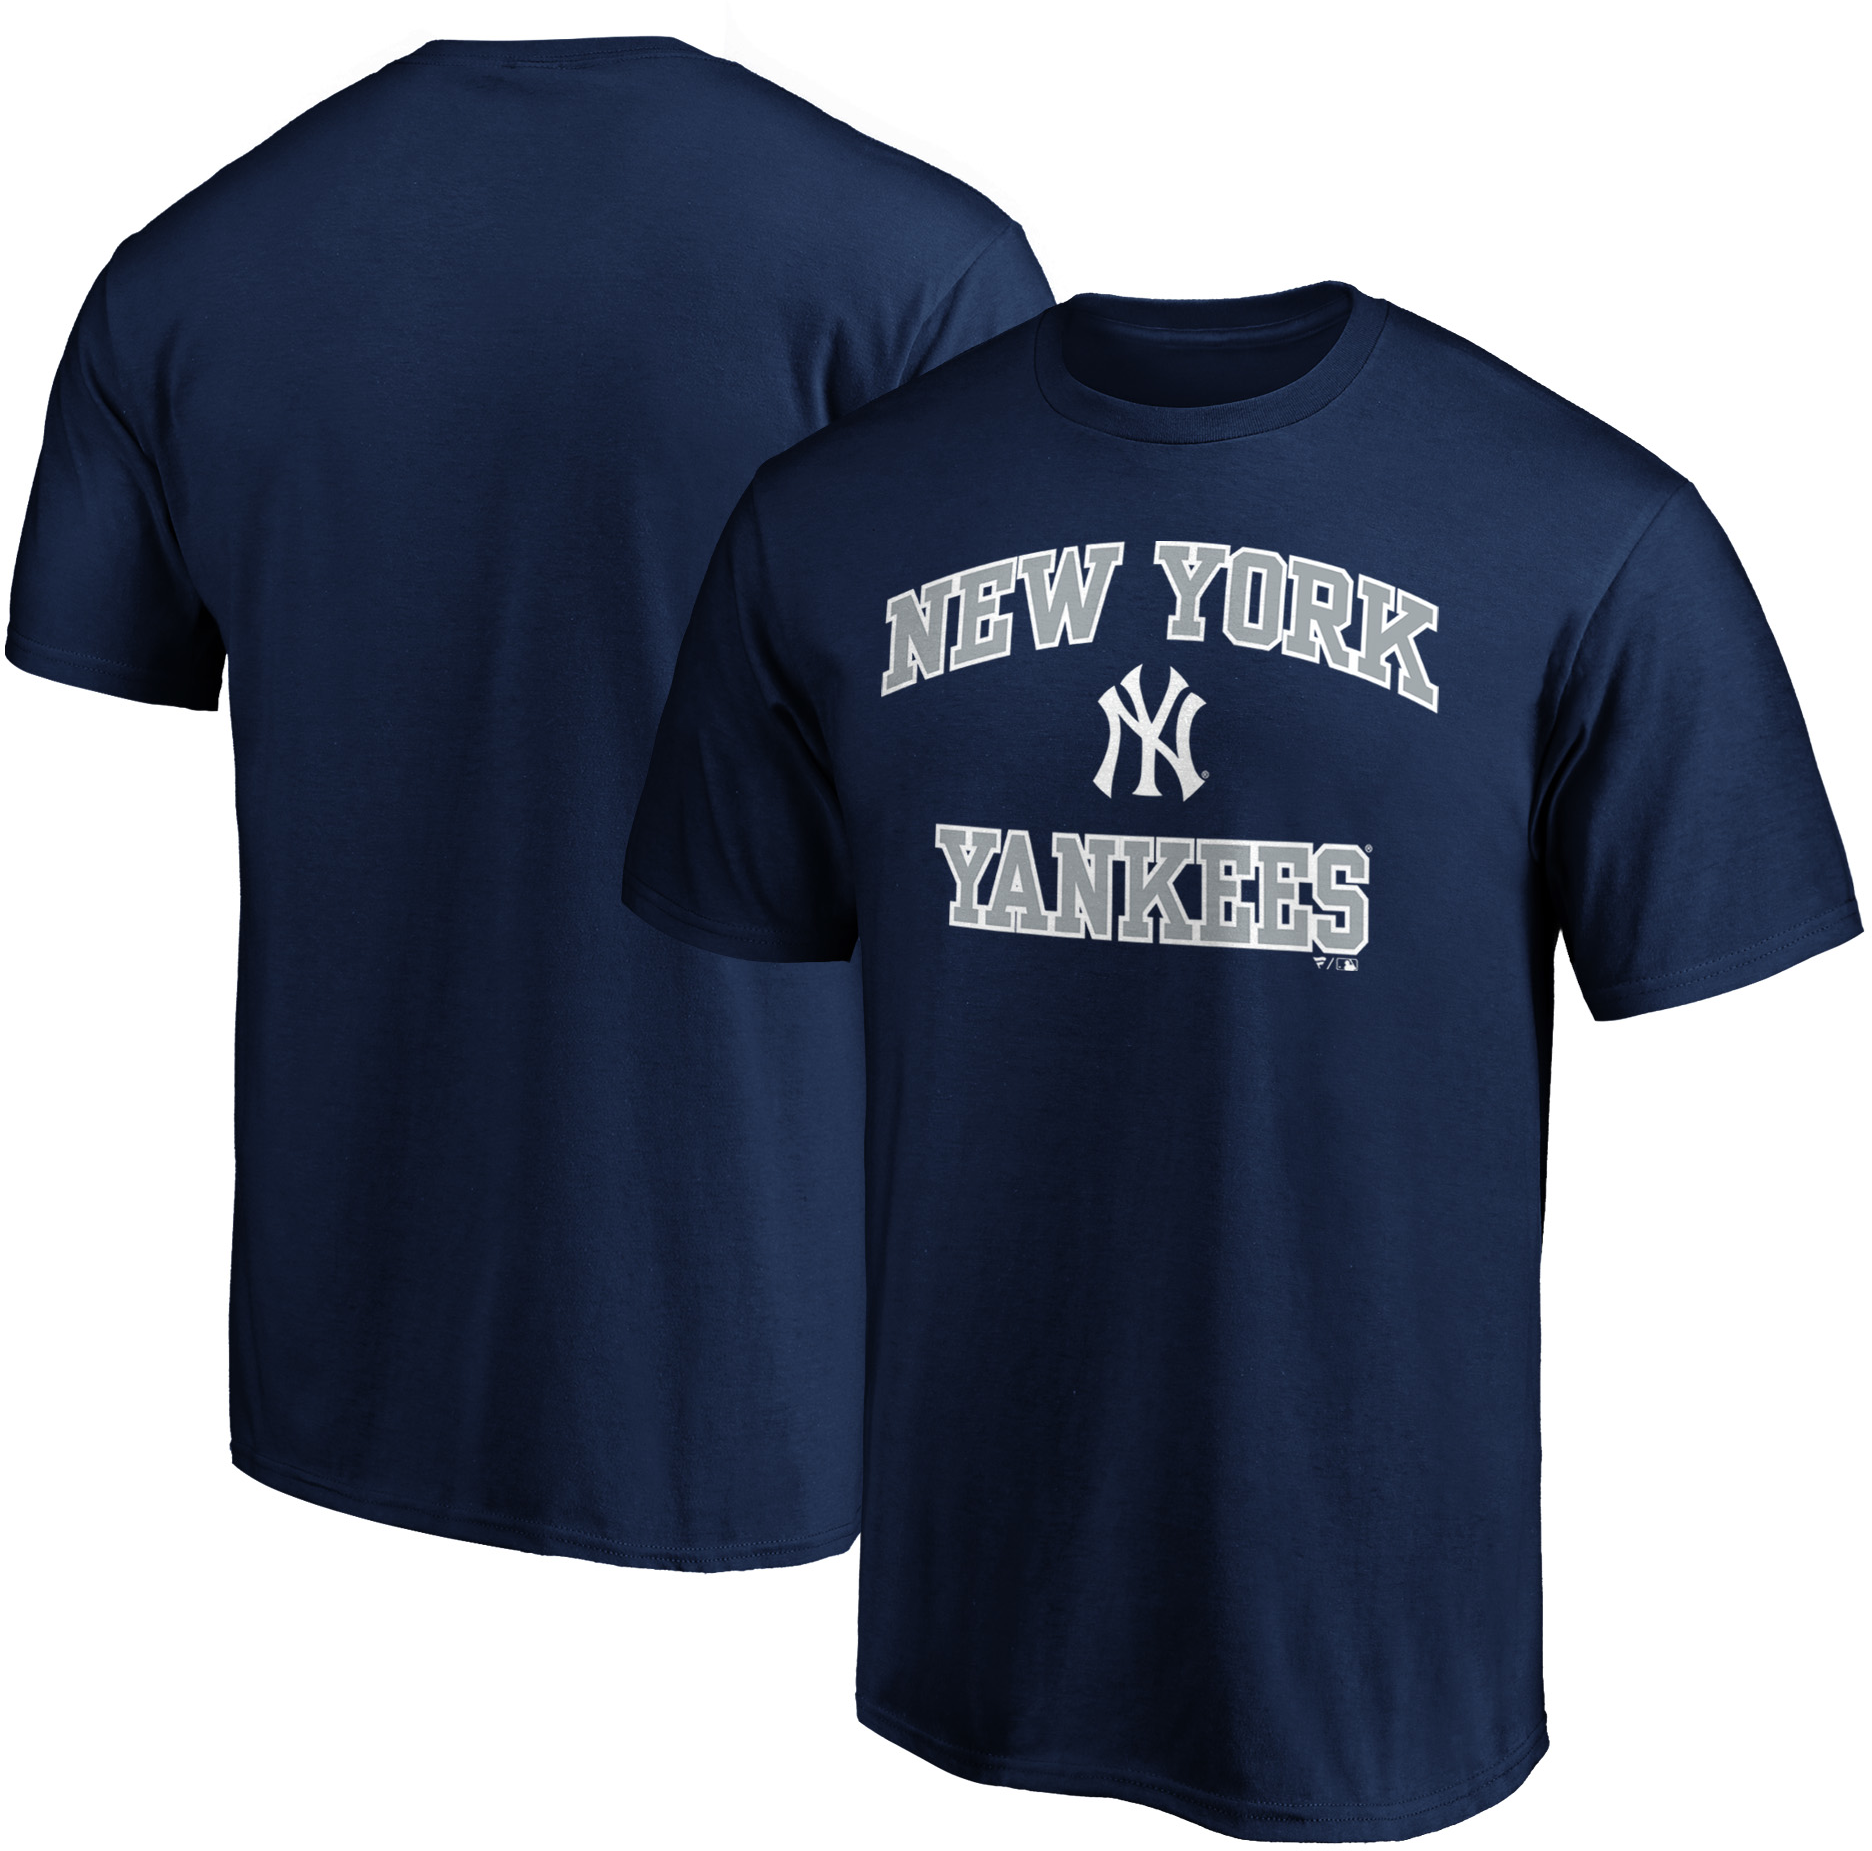 Men's Fanatics Branded Heather Gray New York Rangers Any Name & Number Personalized Evanston Stencil T-Shirt Size: Extra Large